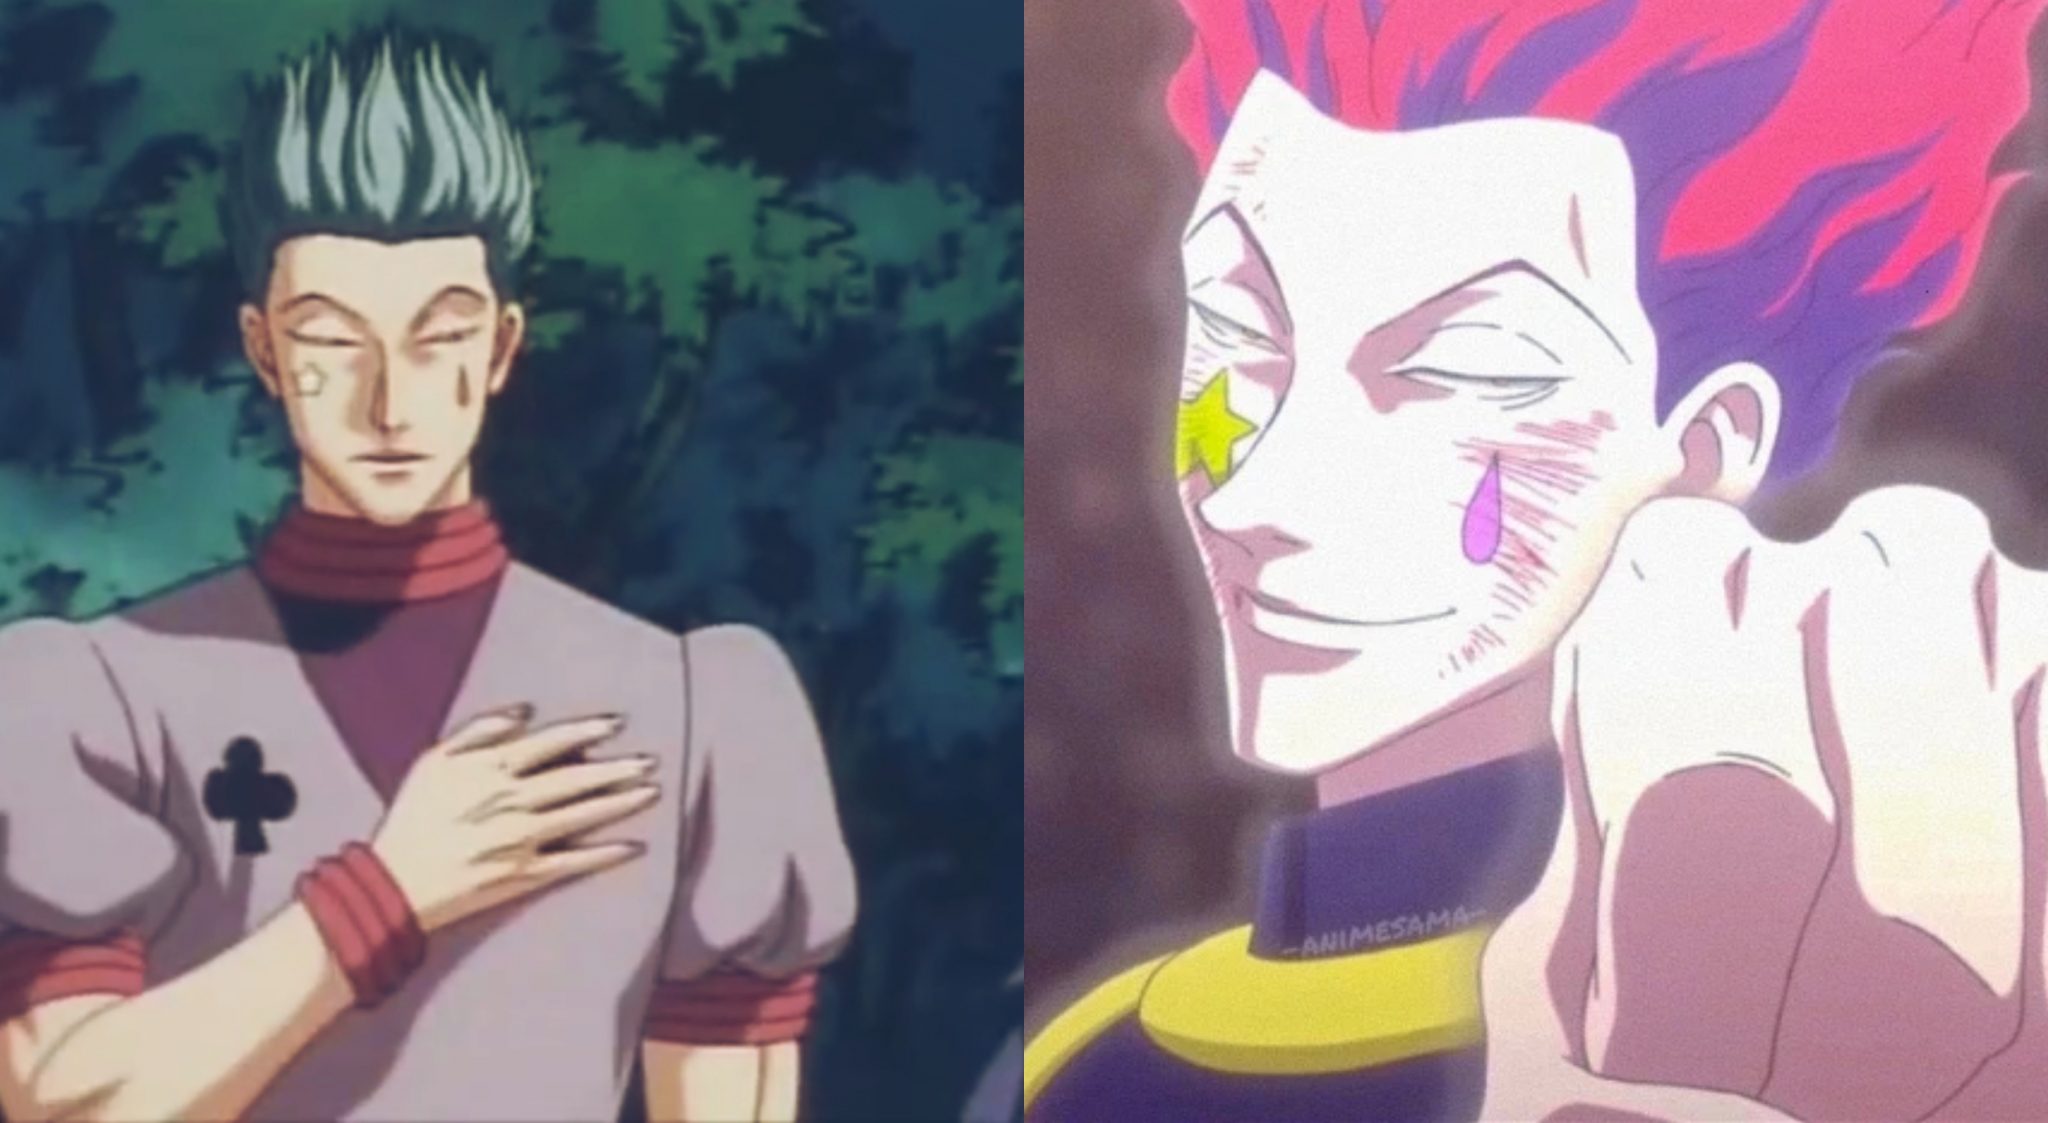 Facts about Hisoka that fans might not know